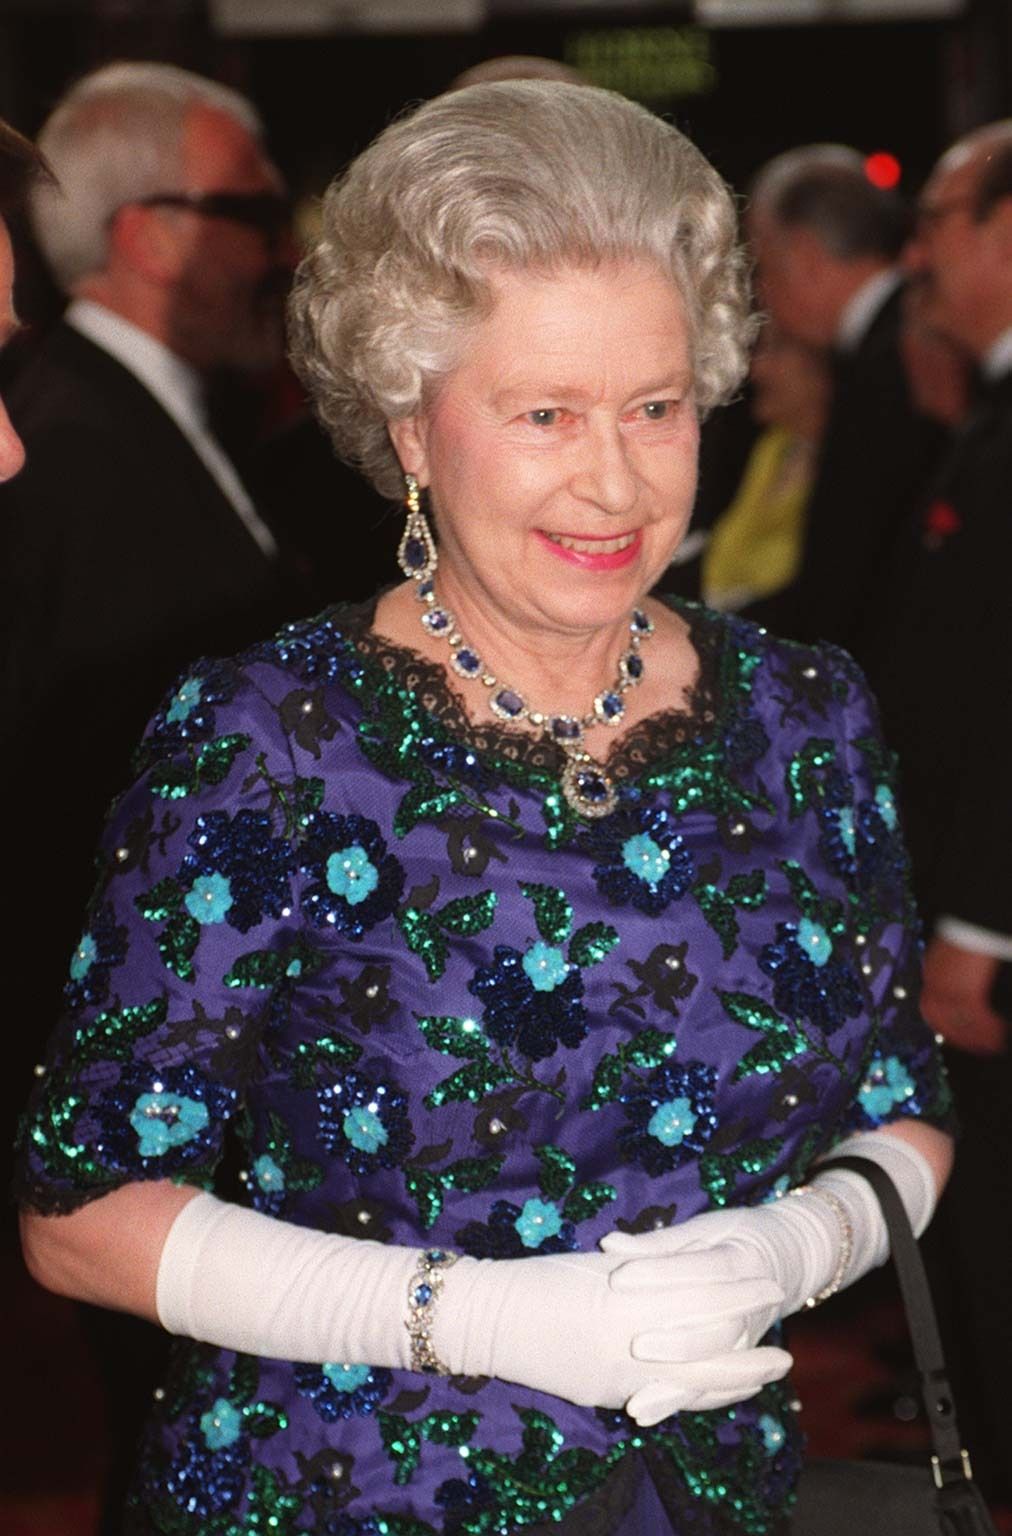 Queen Elizabeth II arrives for the Royal Variety Performance, at London's Dominion Theatre.